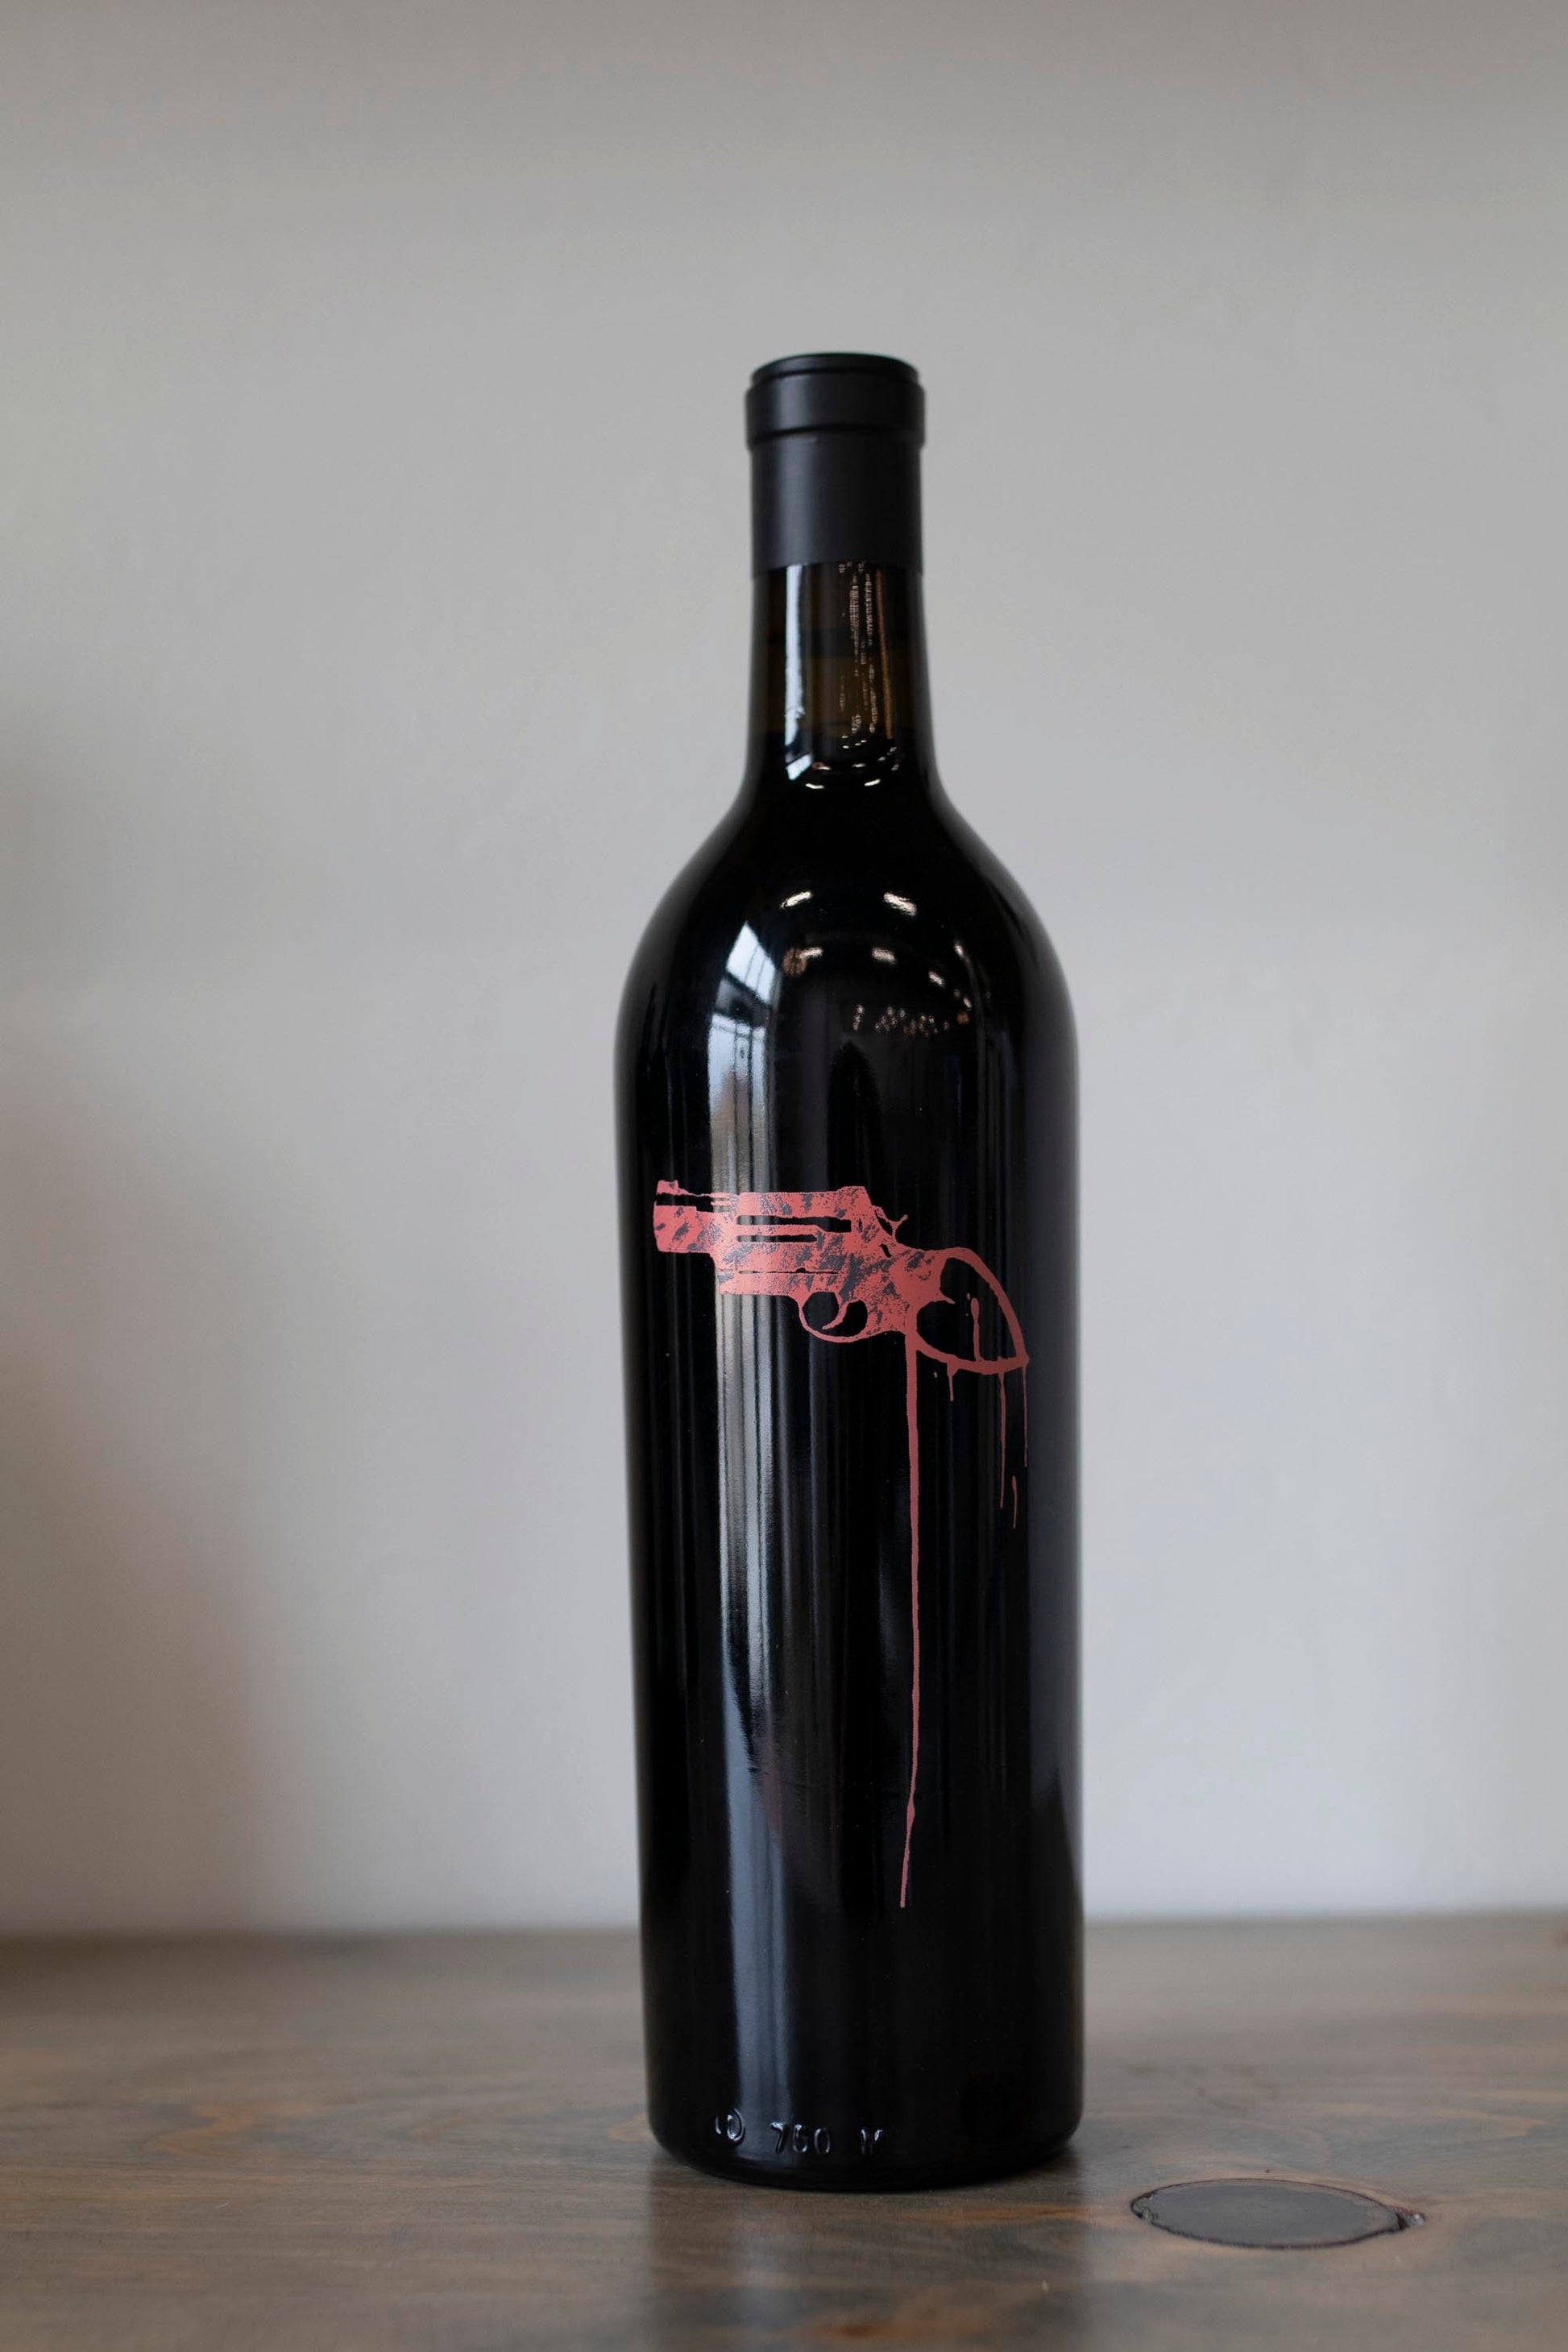 Bottle of Love Hammer Cabernet Sauvign found at Vine & Board in 3809 NW 166th St Suite 1, Edmond, OK 73012